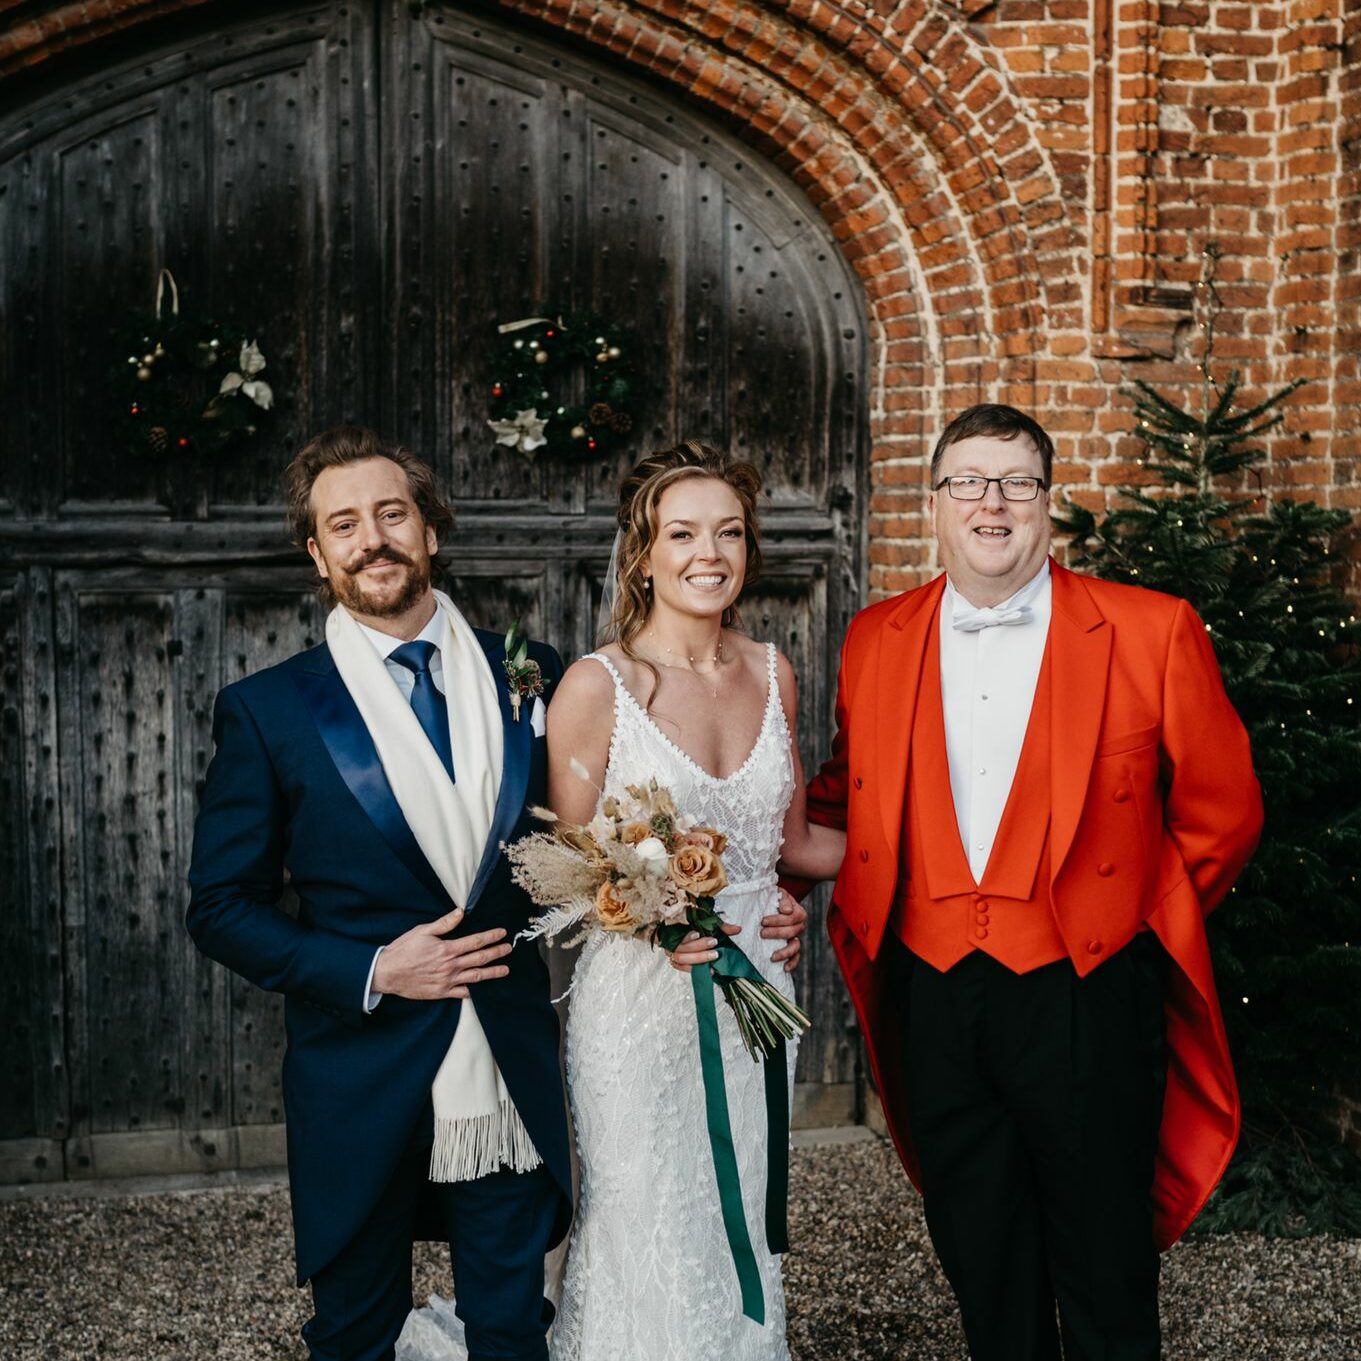 society wedding toastmaster london and essex